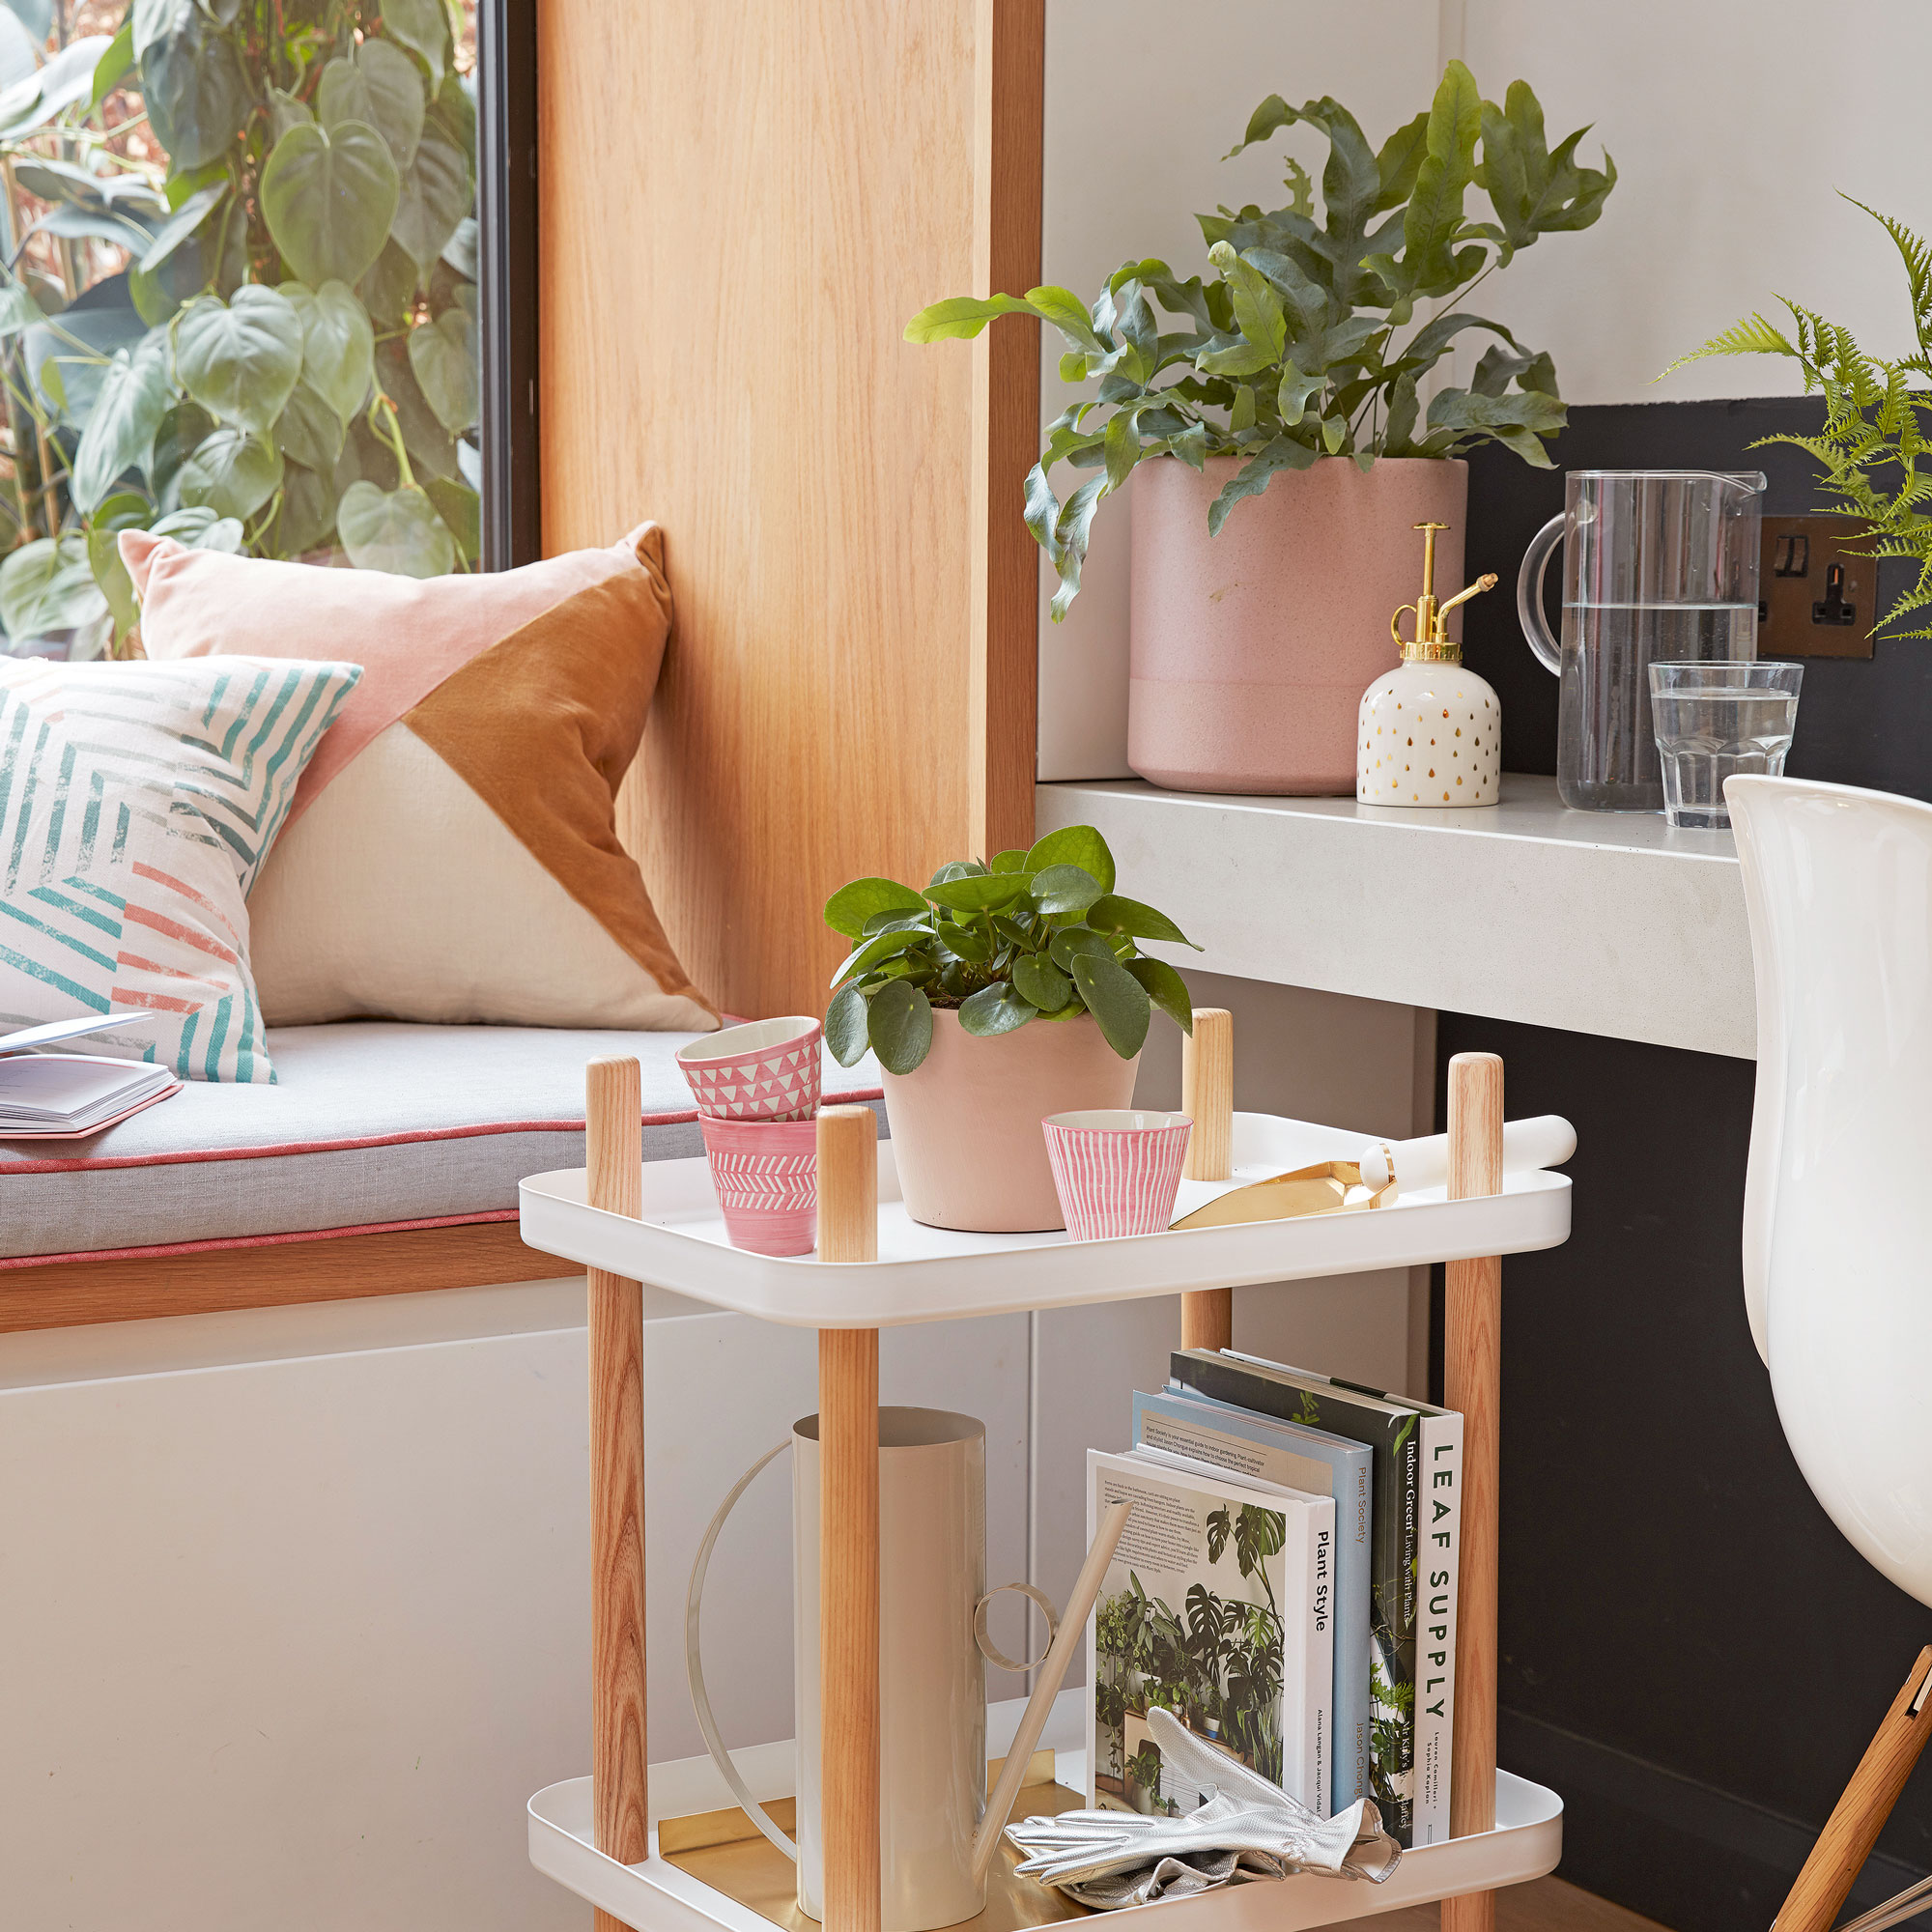 houseplants arranged in living area on a trolley and kitchen island